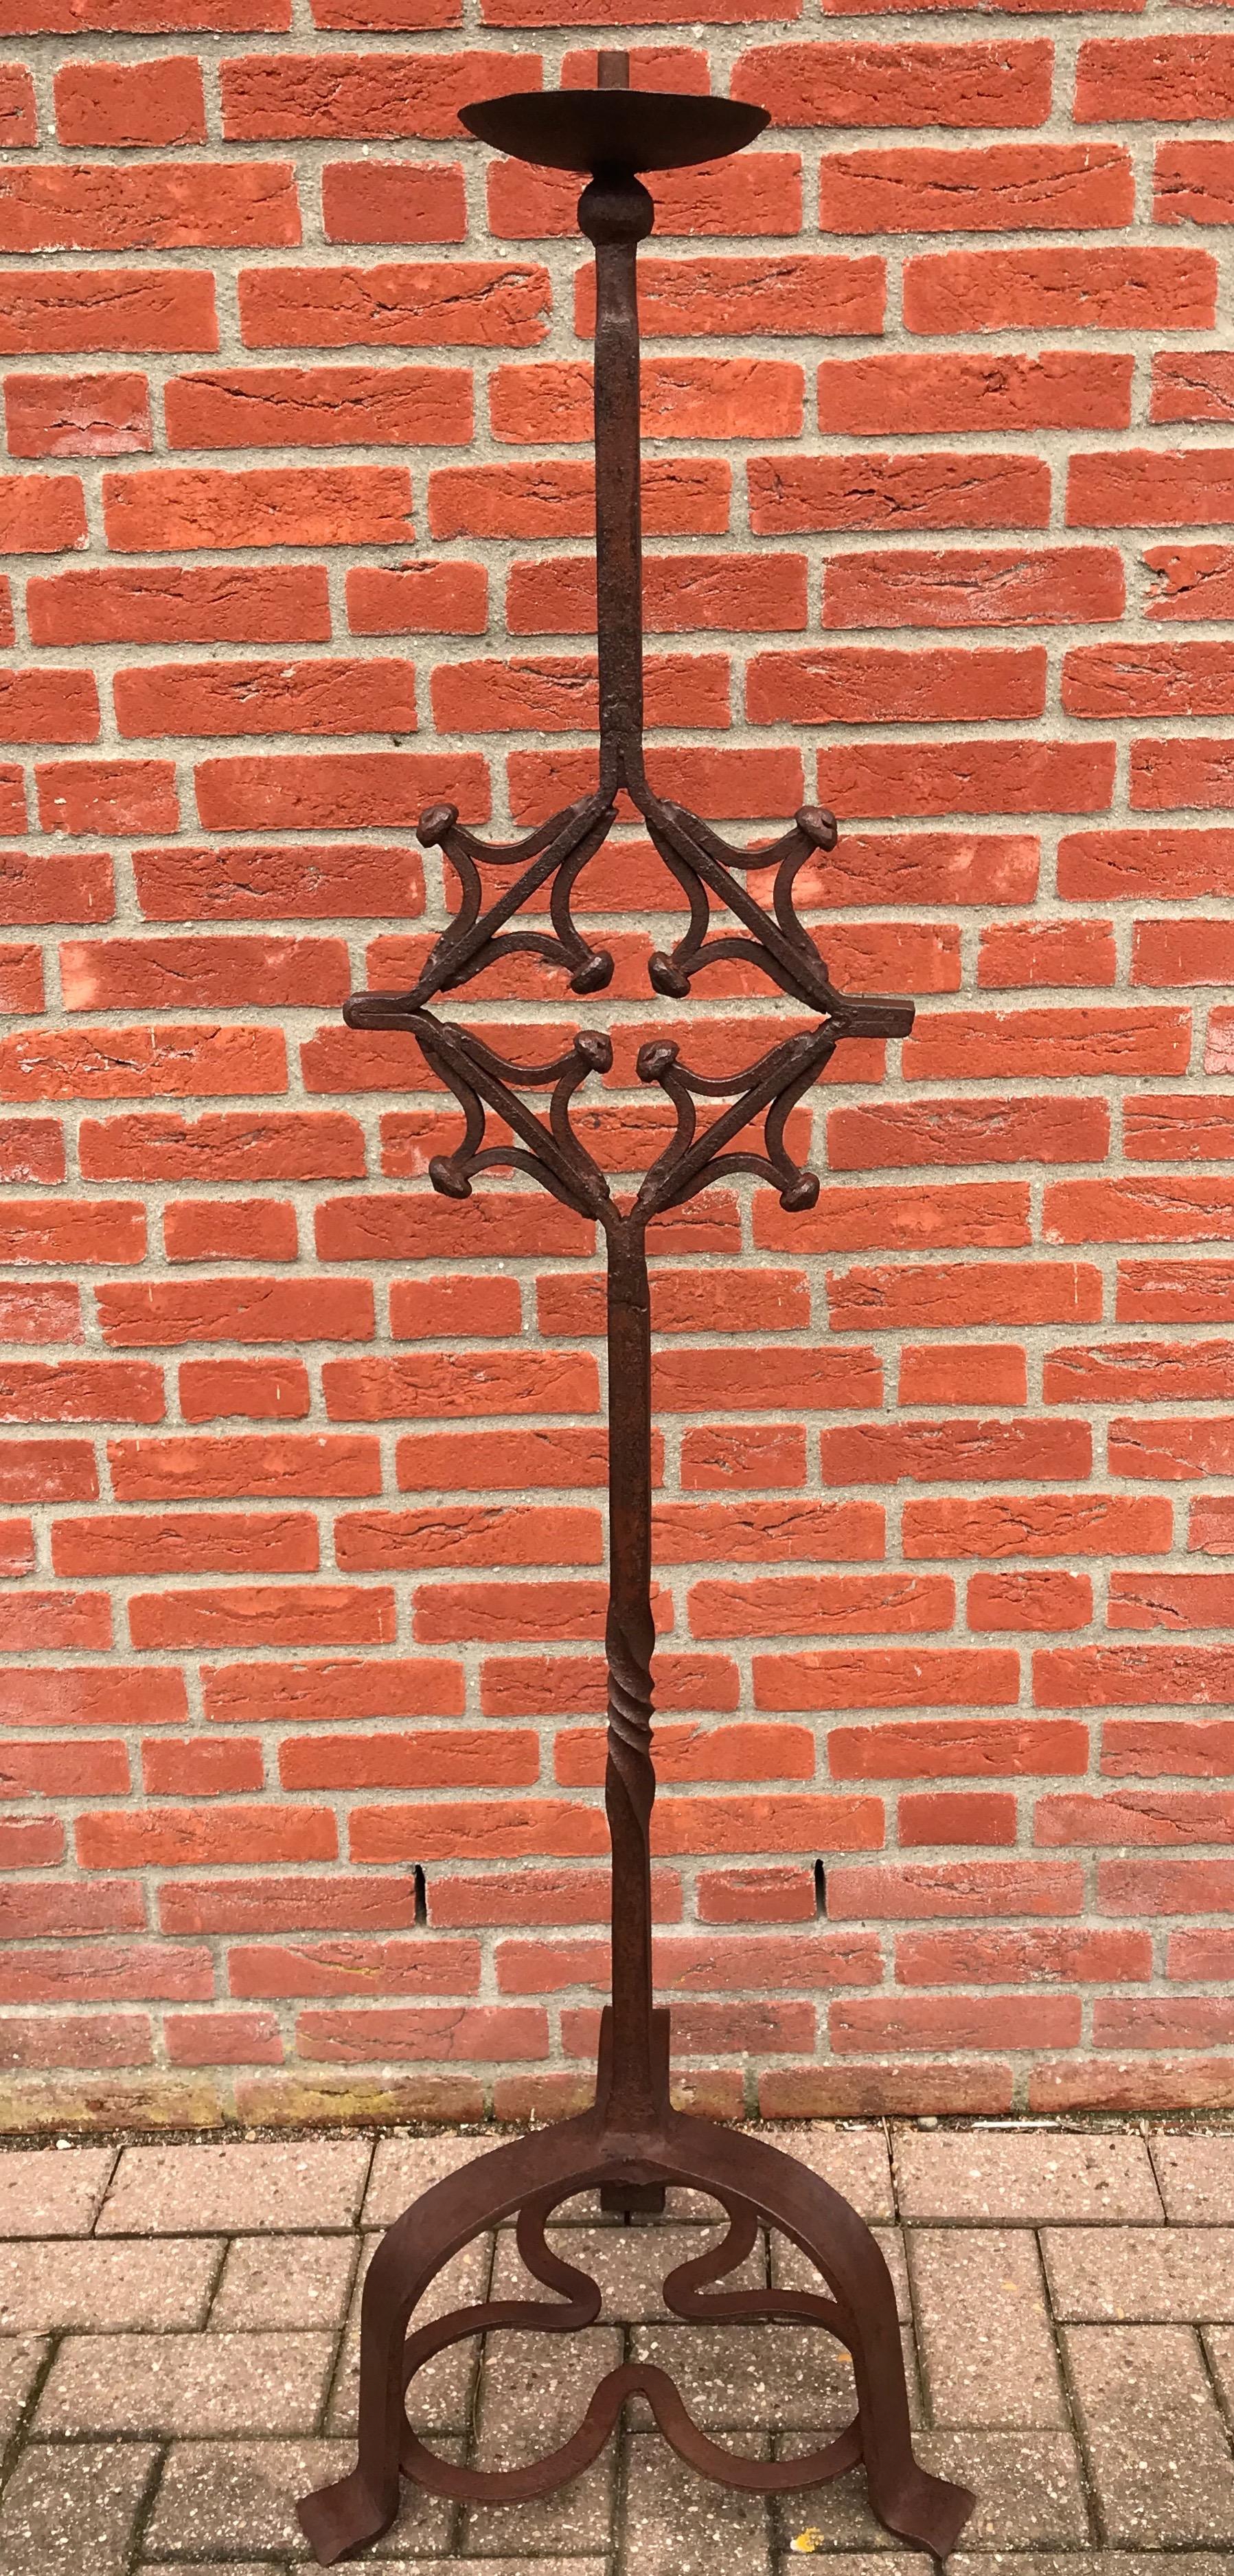 Hand forged Gothic floor-lamp.

If you appreciate the Gothic style as much as we do then you could be the next custodian of this amazing and all handcrafted floor lamp. A highly skilled artisan around the turn of the century has spent many hours